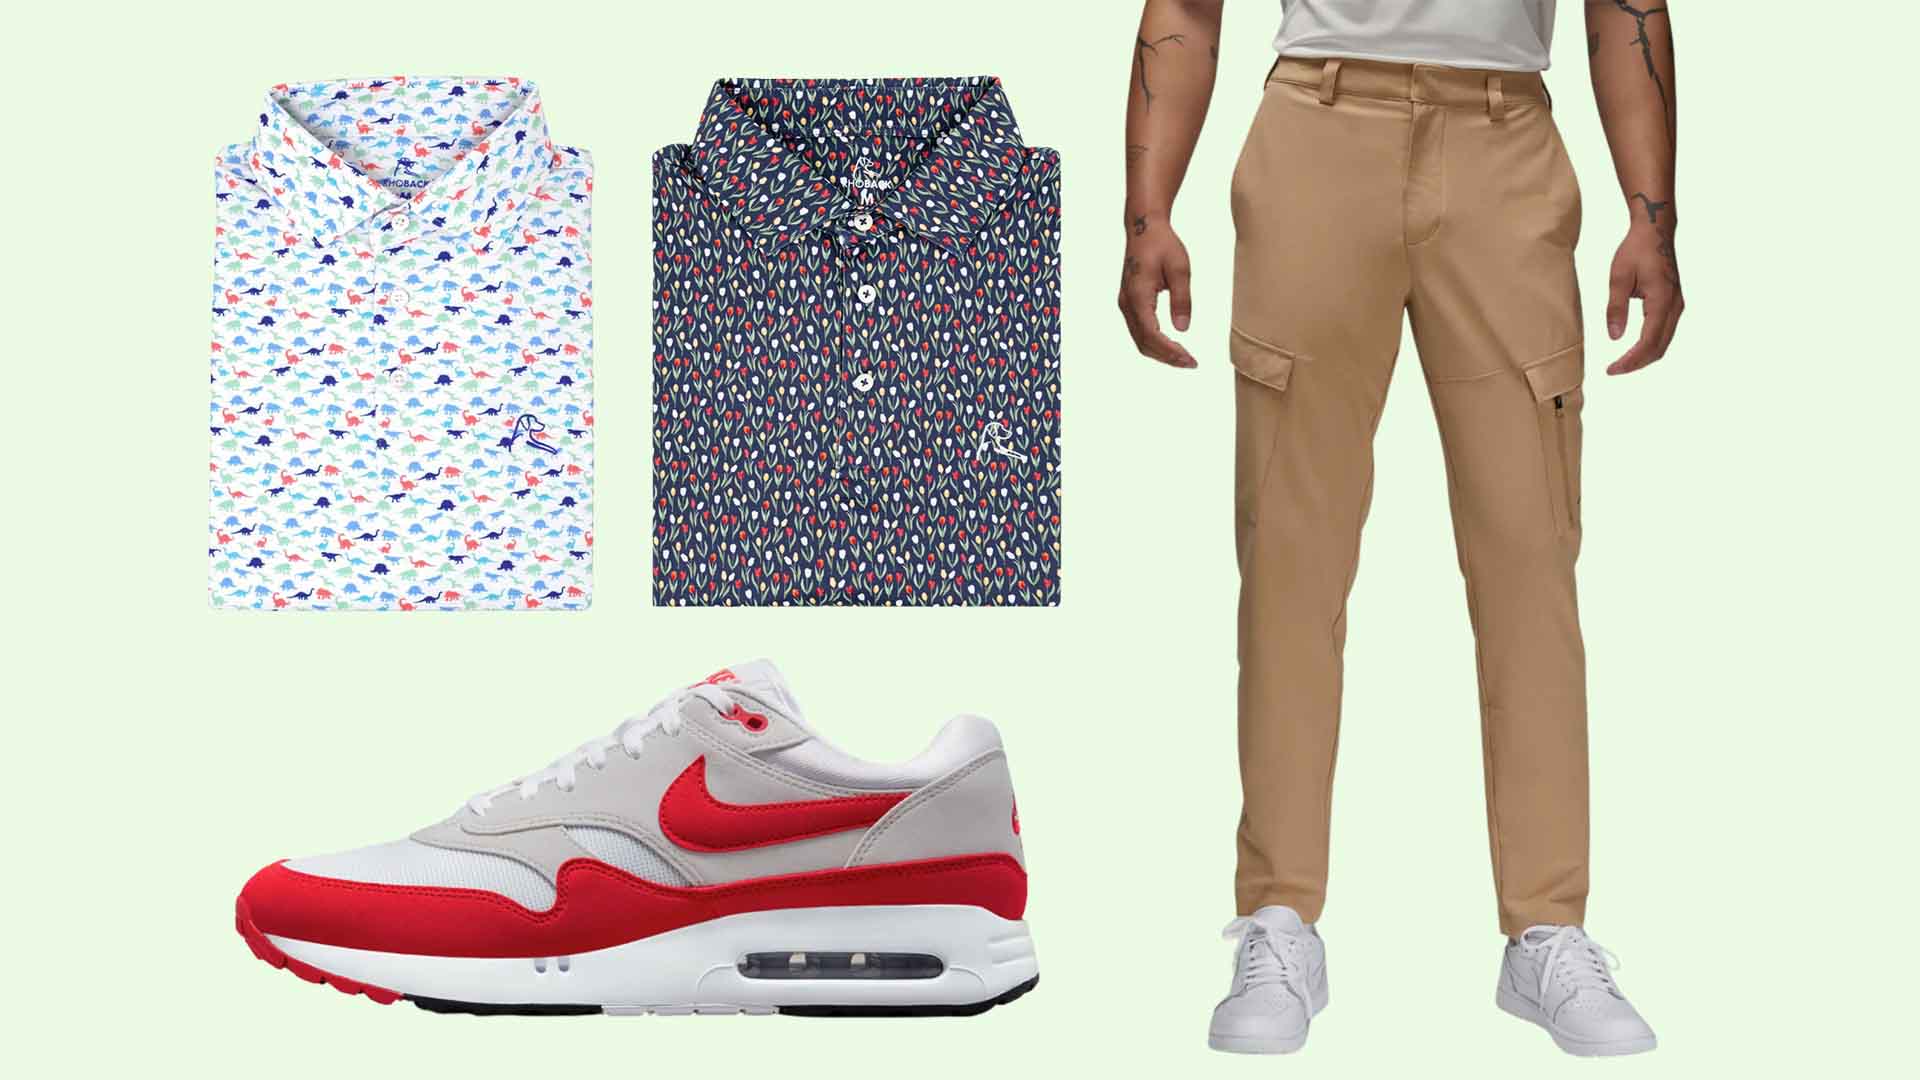 These 3 stylish golf outfits for men are perfect for summer rounds ...